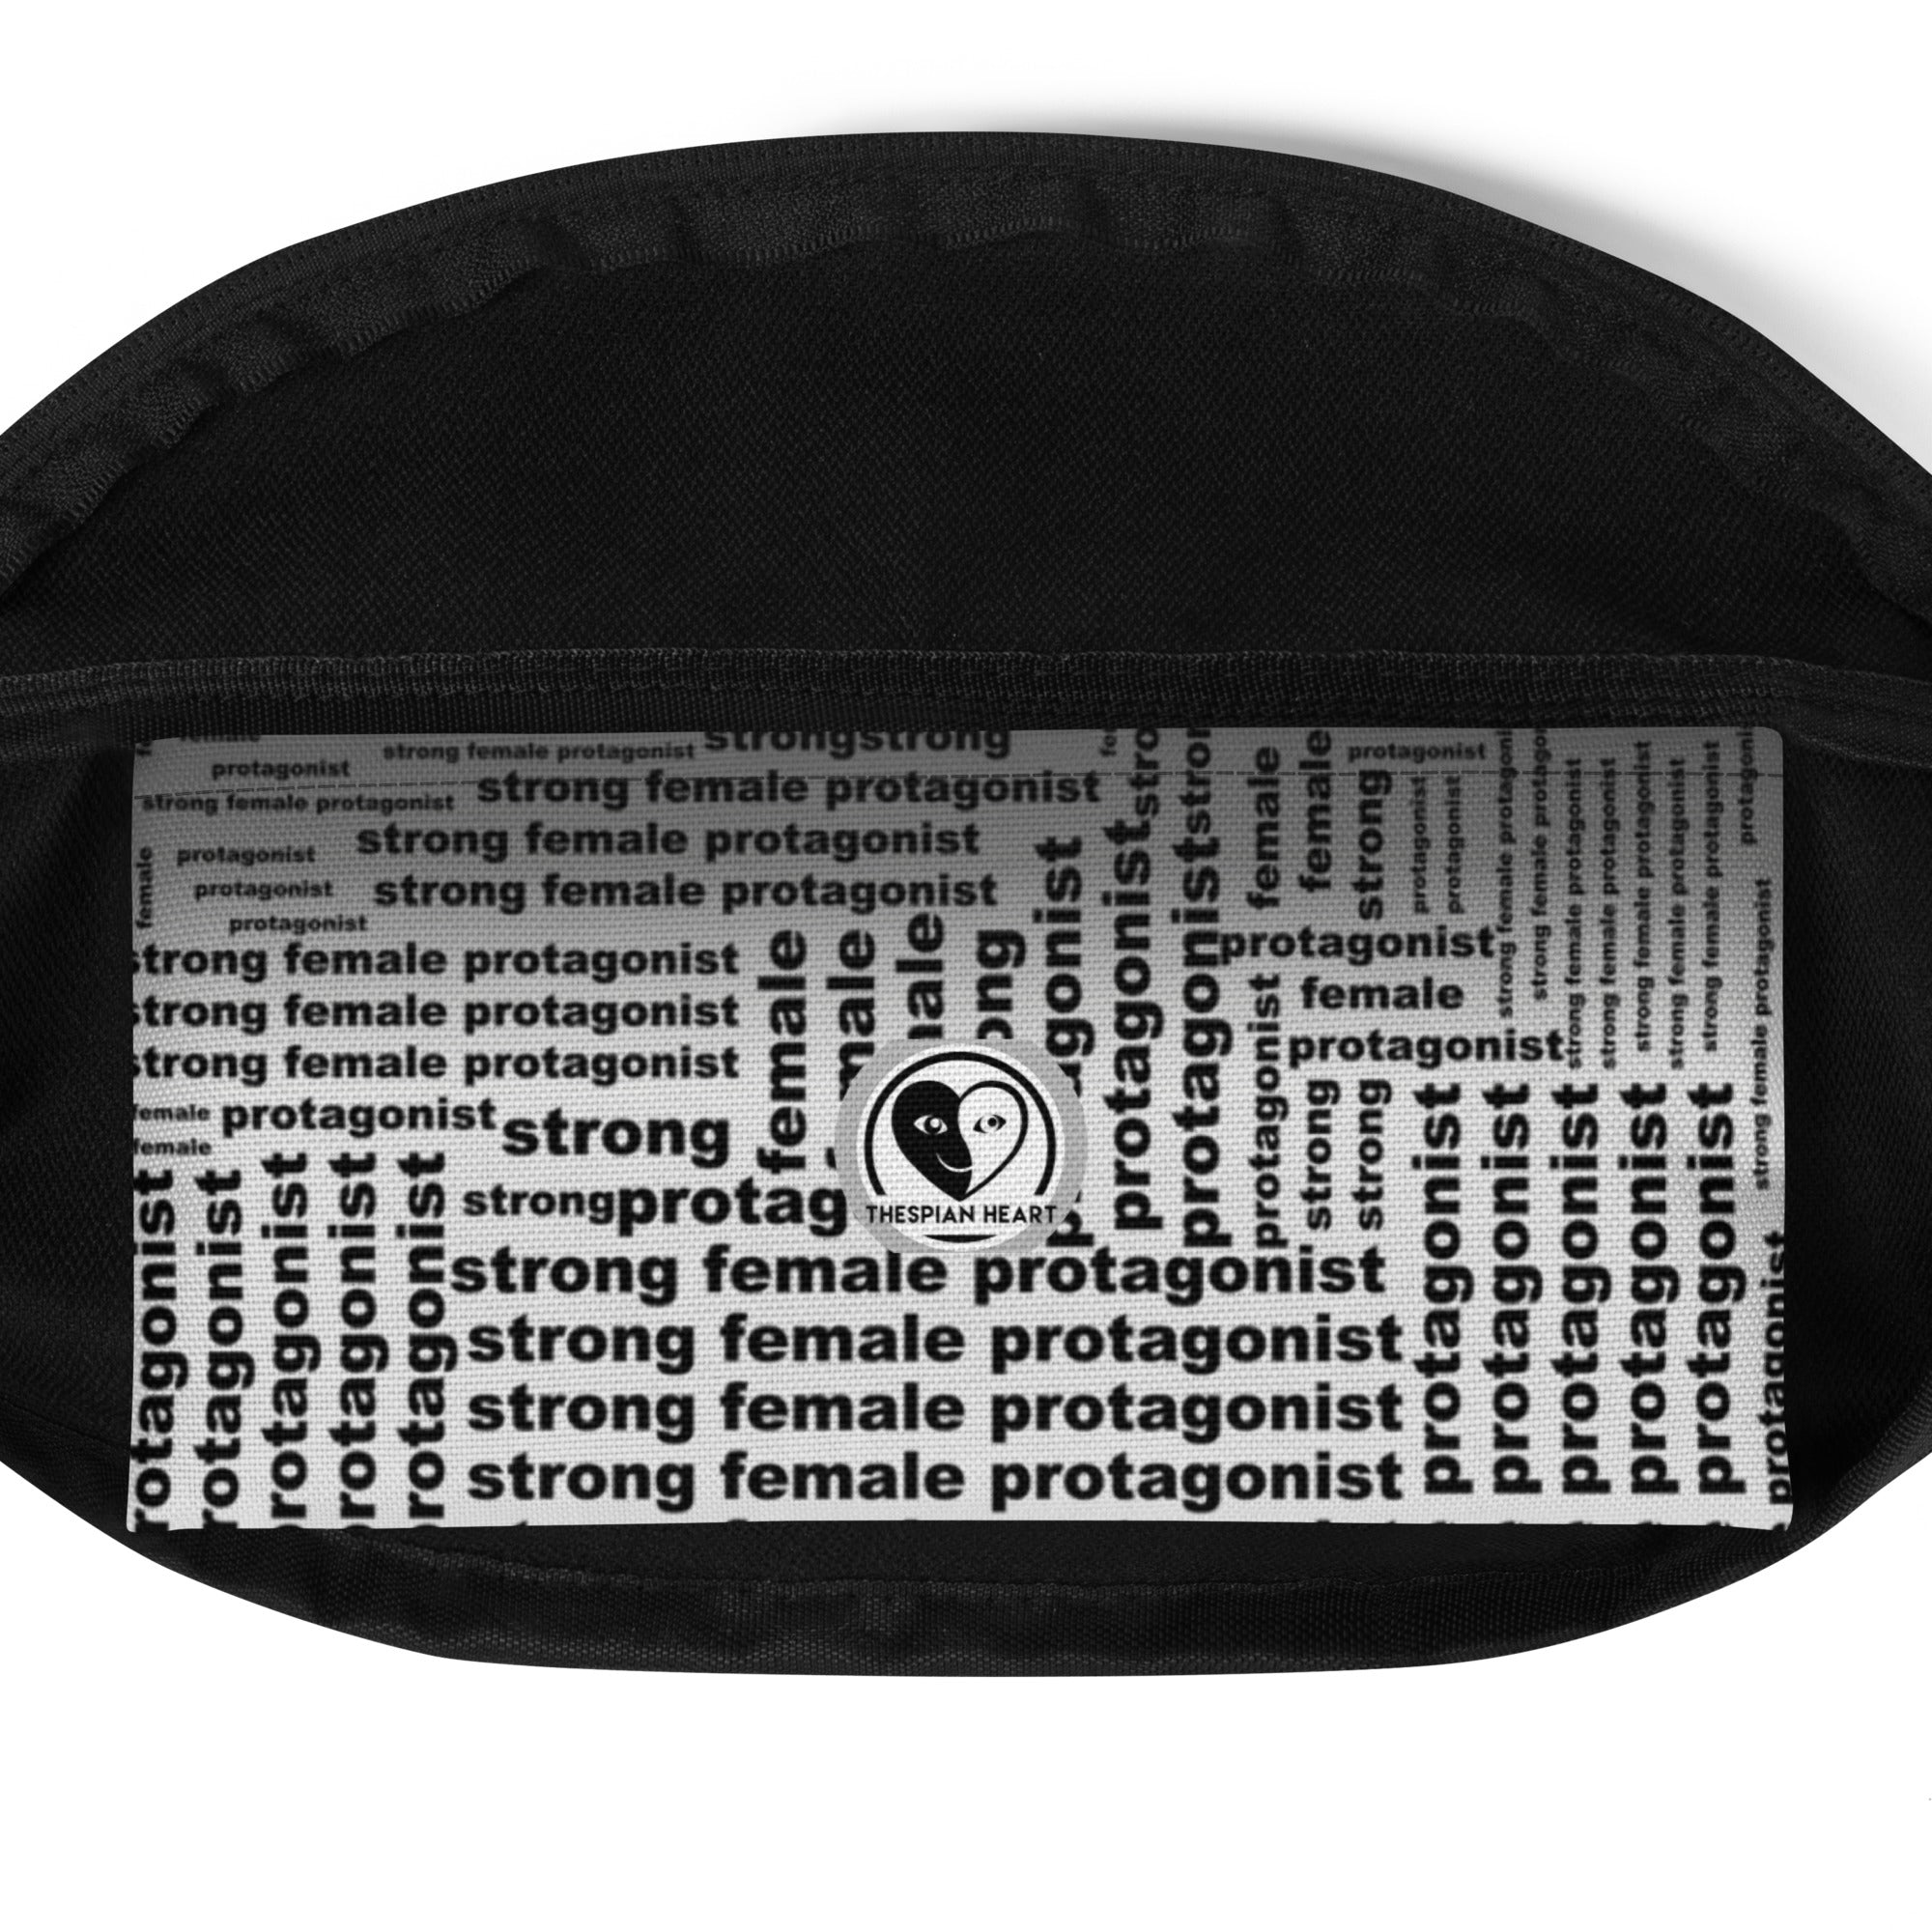 Strong Female Protagonist - All Over Print Bum Bag Fanny Pack